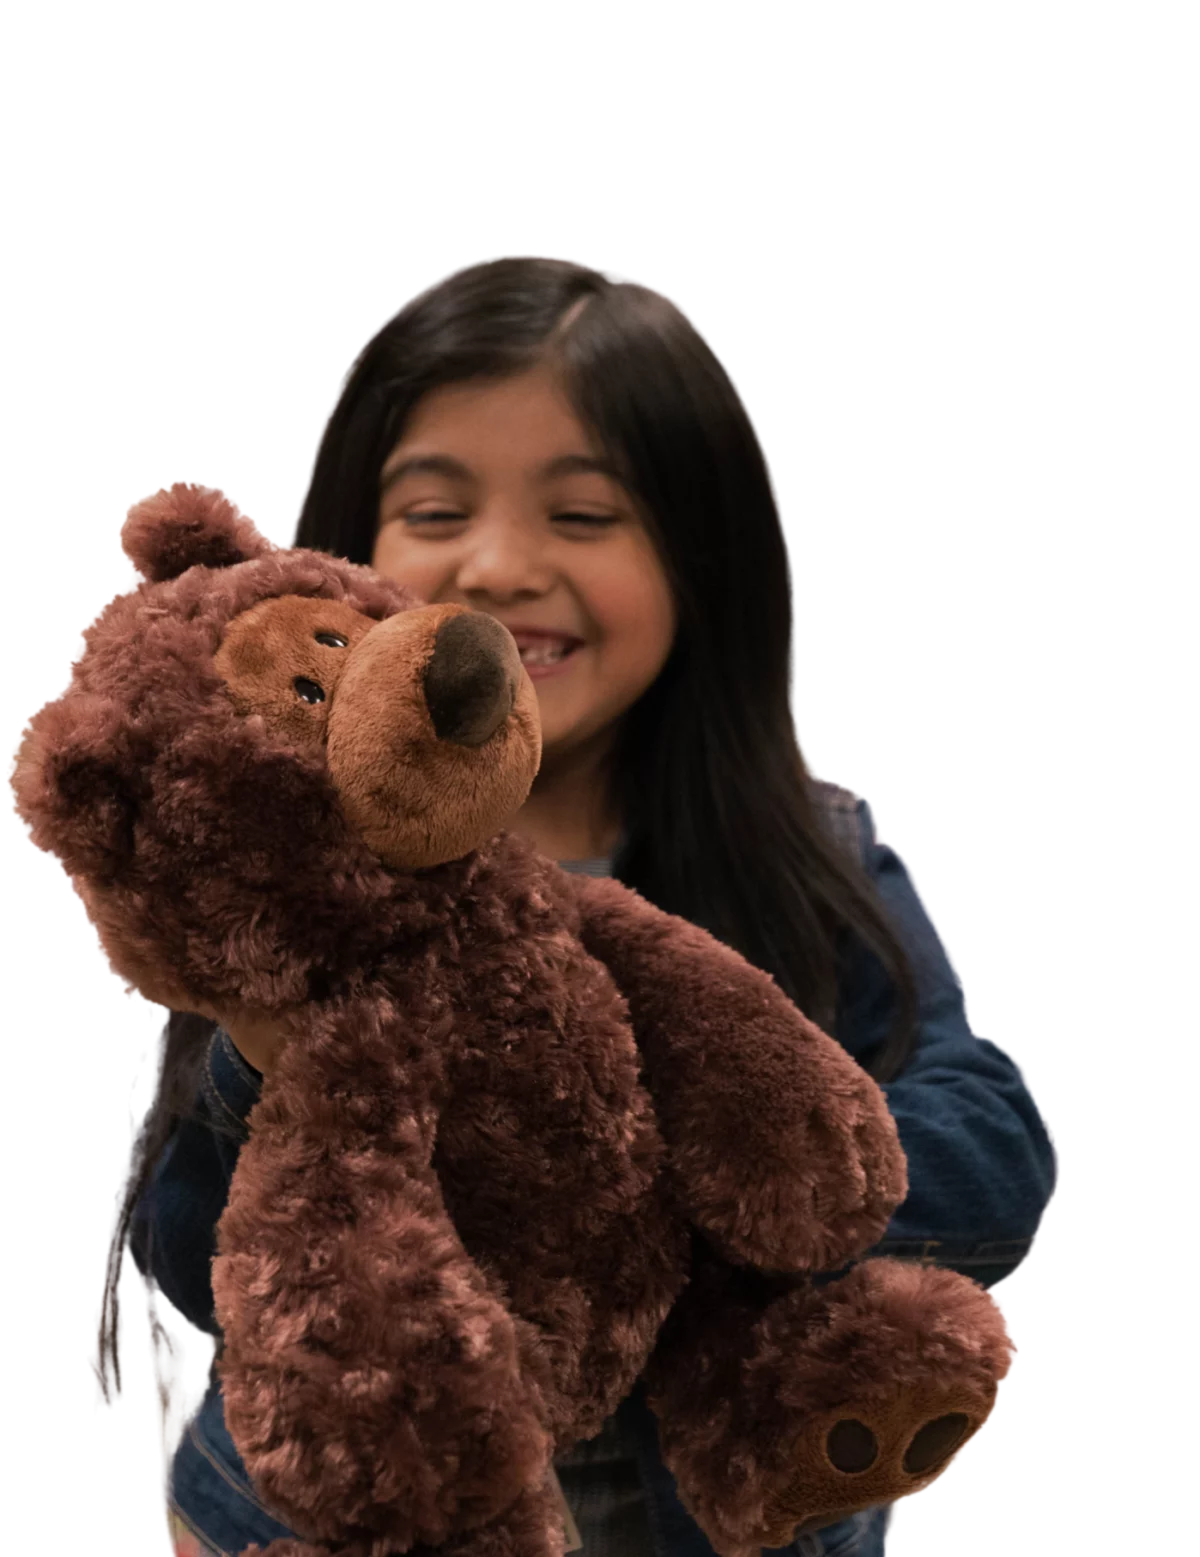 Girl playing with teddy bear